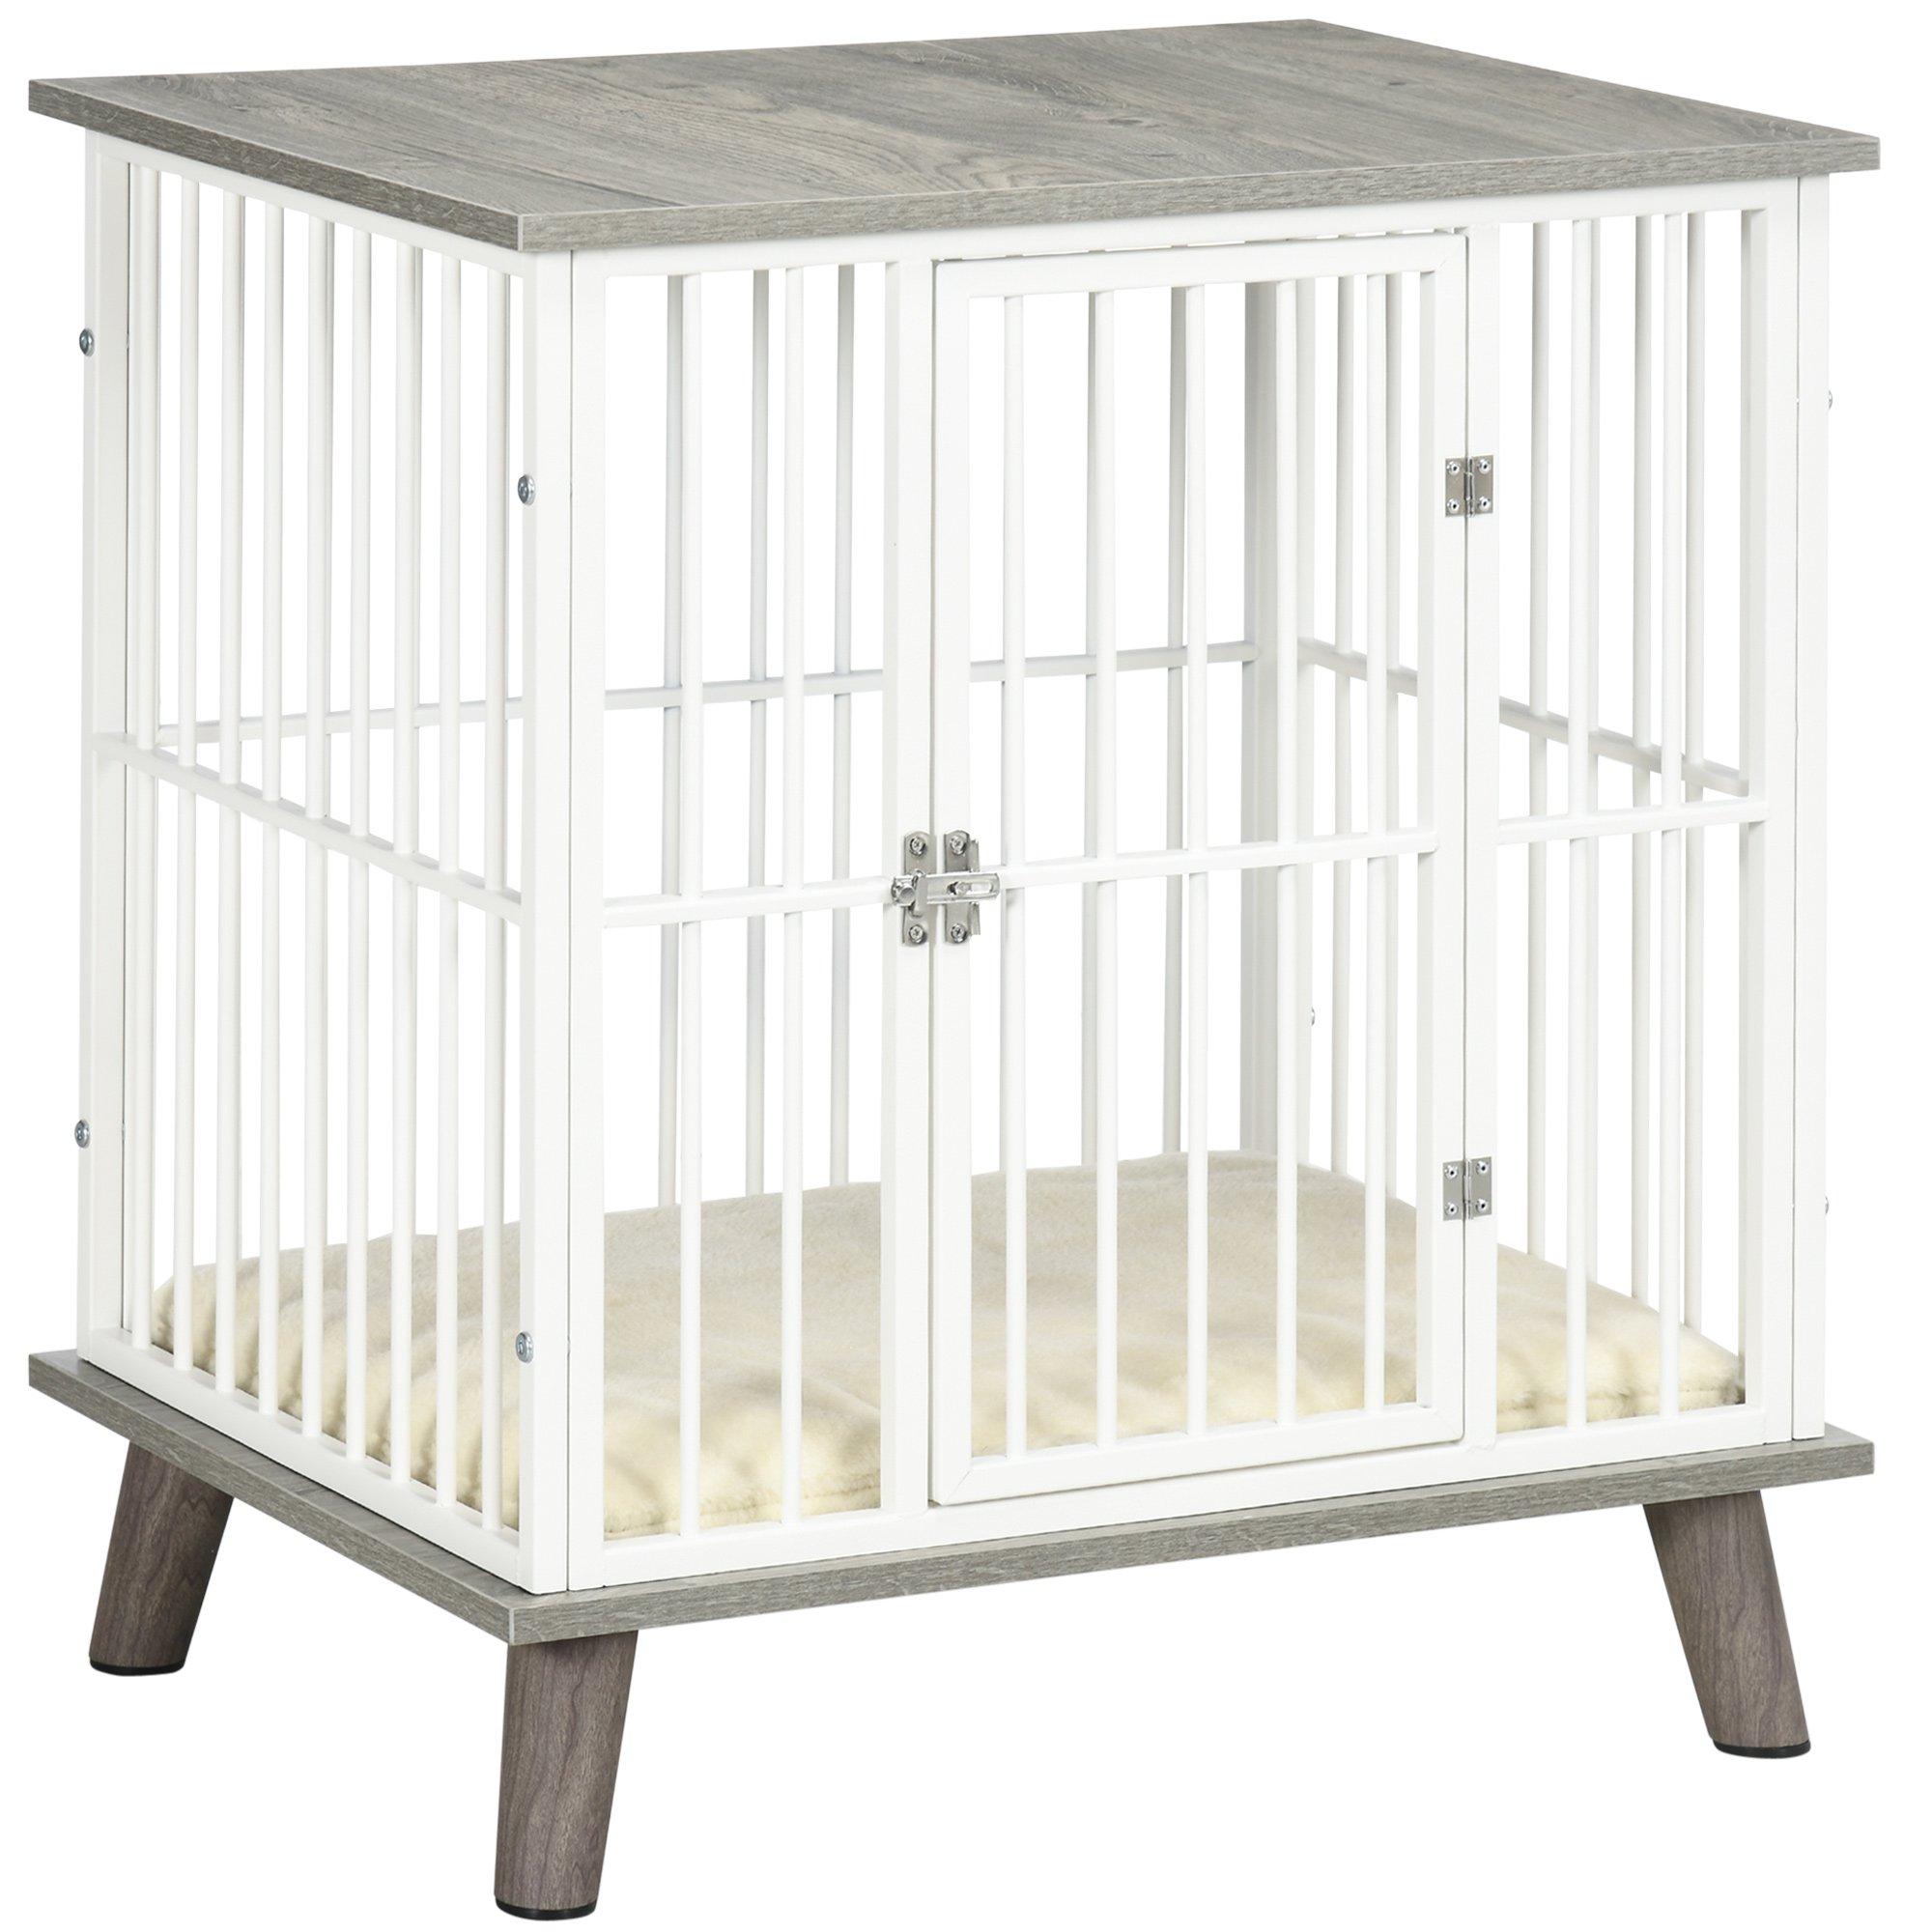 Dog Crate Furniture, Dog Crate End Table with Cushion, 64.5 x 48 x 70.5cm - Grey